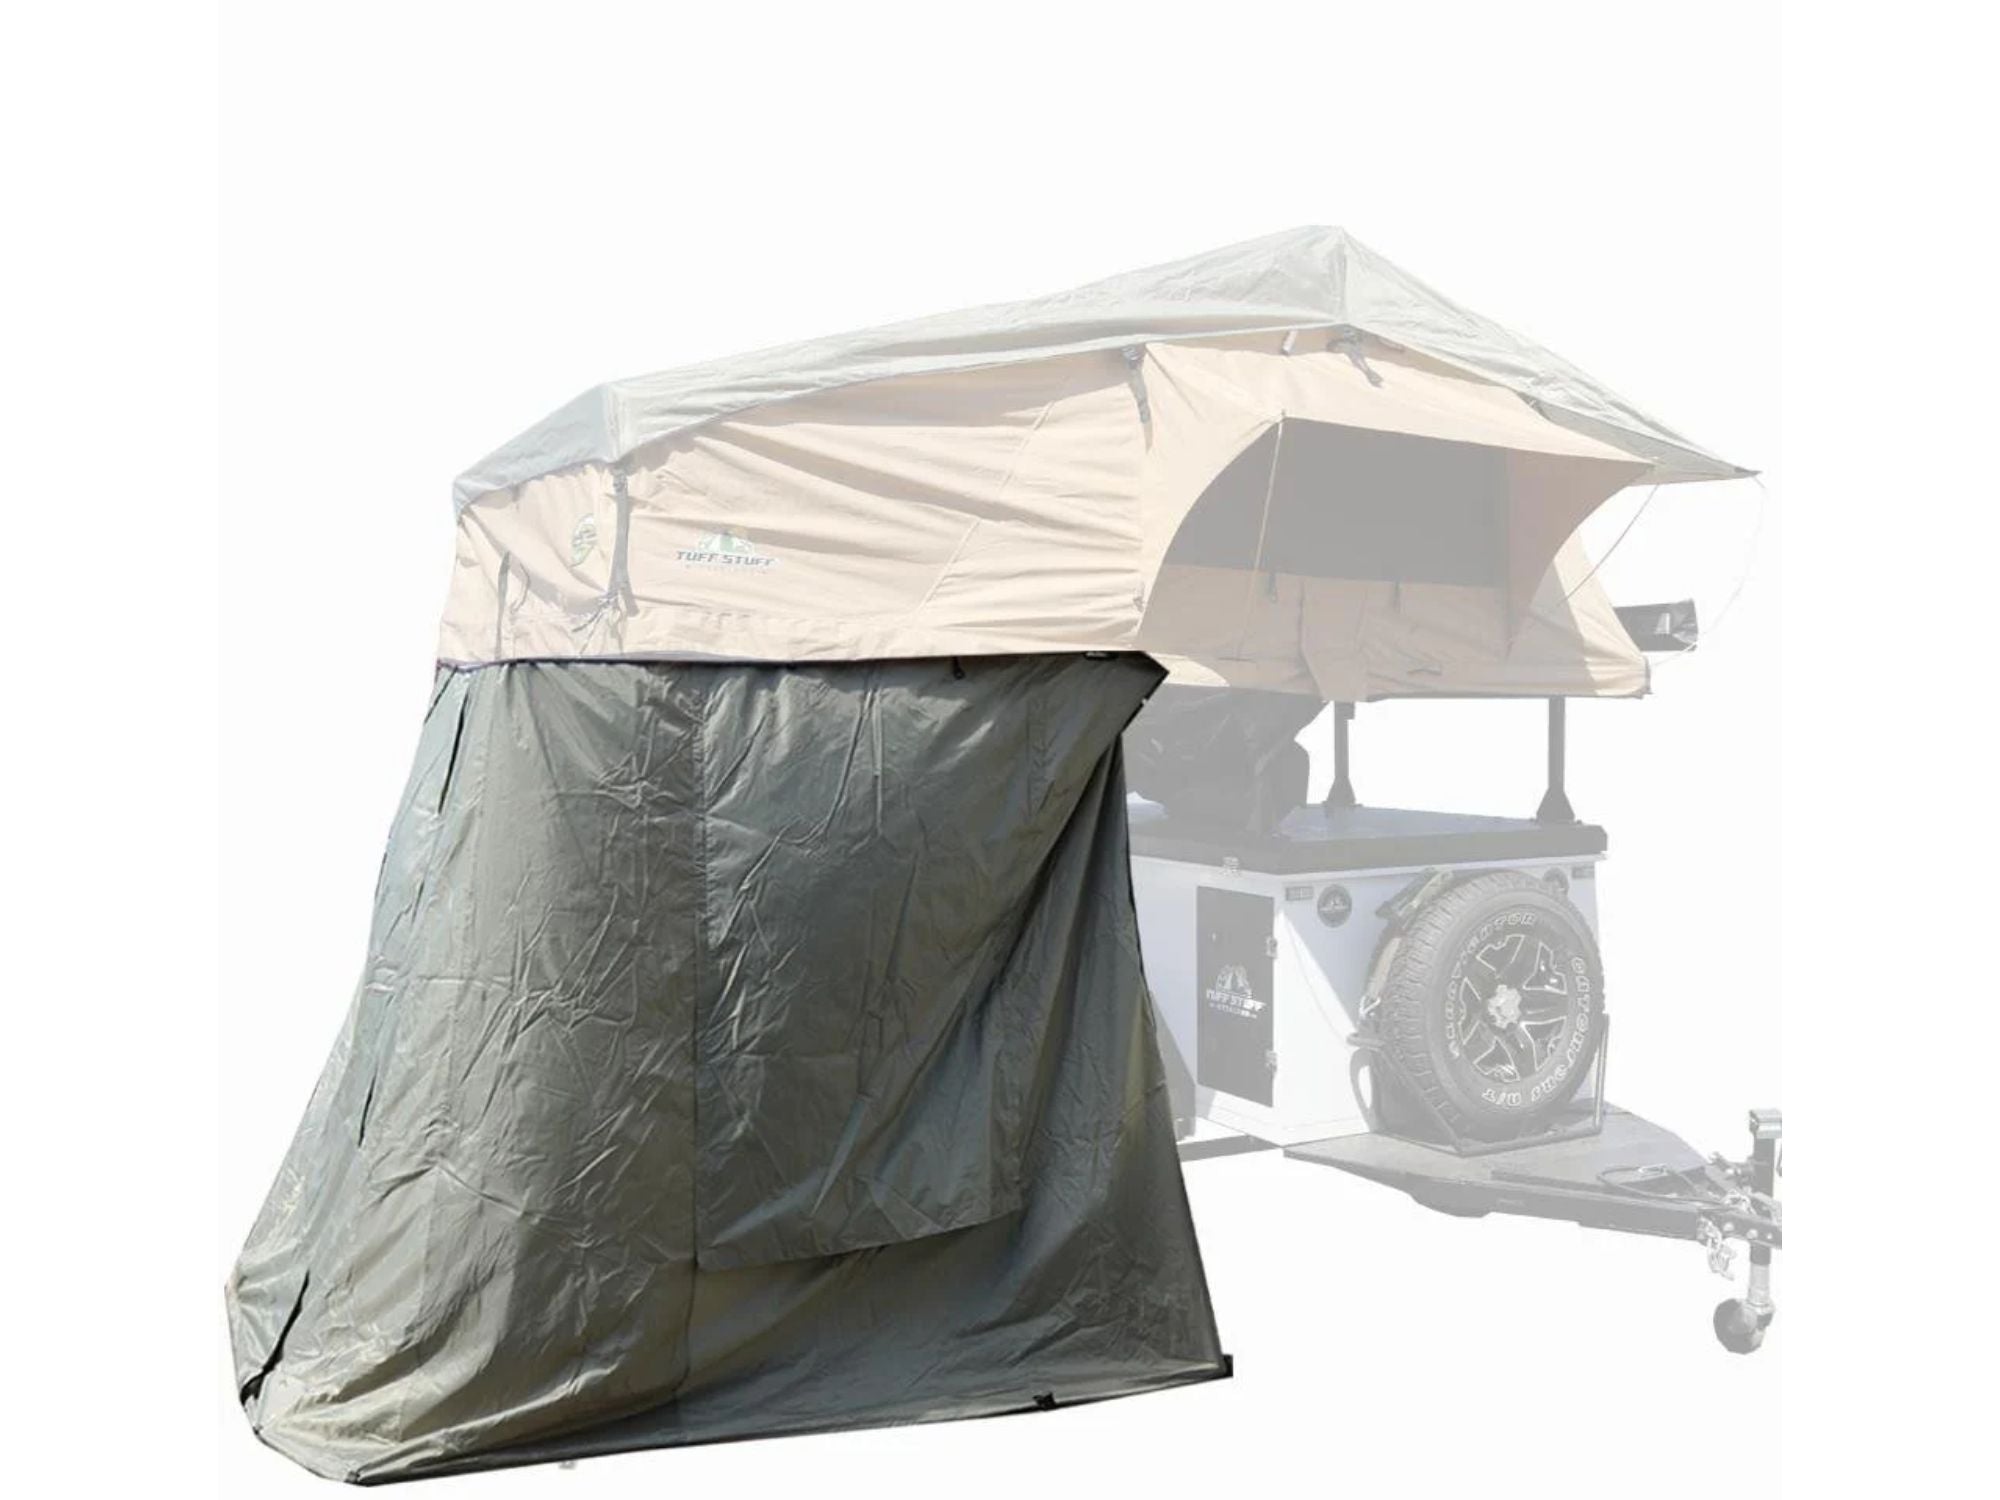 Elite Rooftop Tent Includes Annex Room, 4-5 Person, Tan